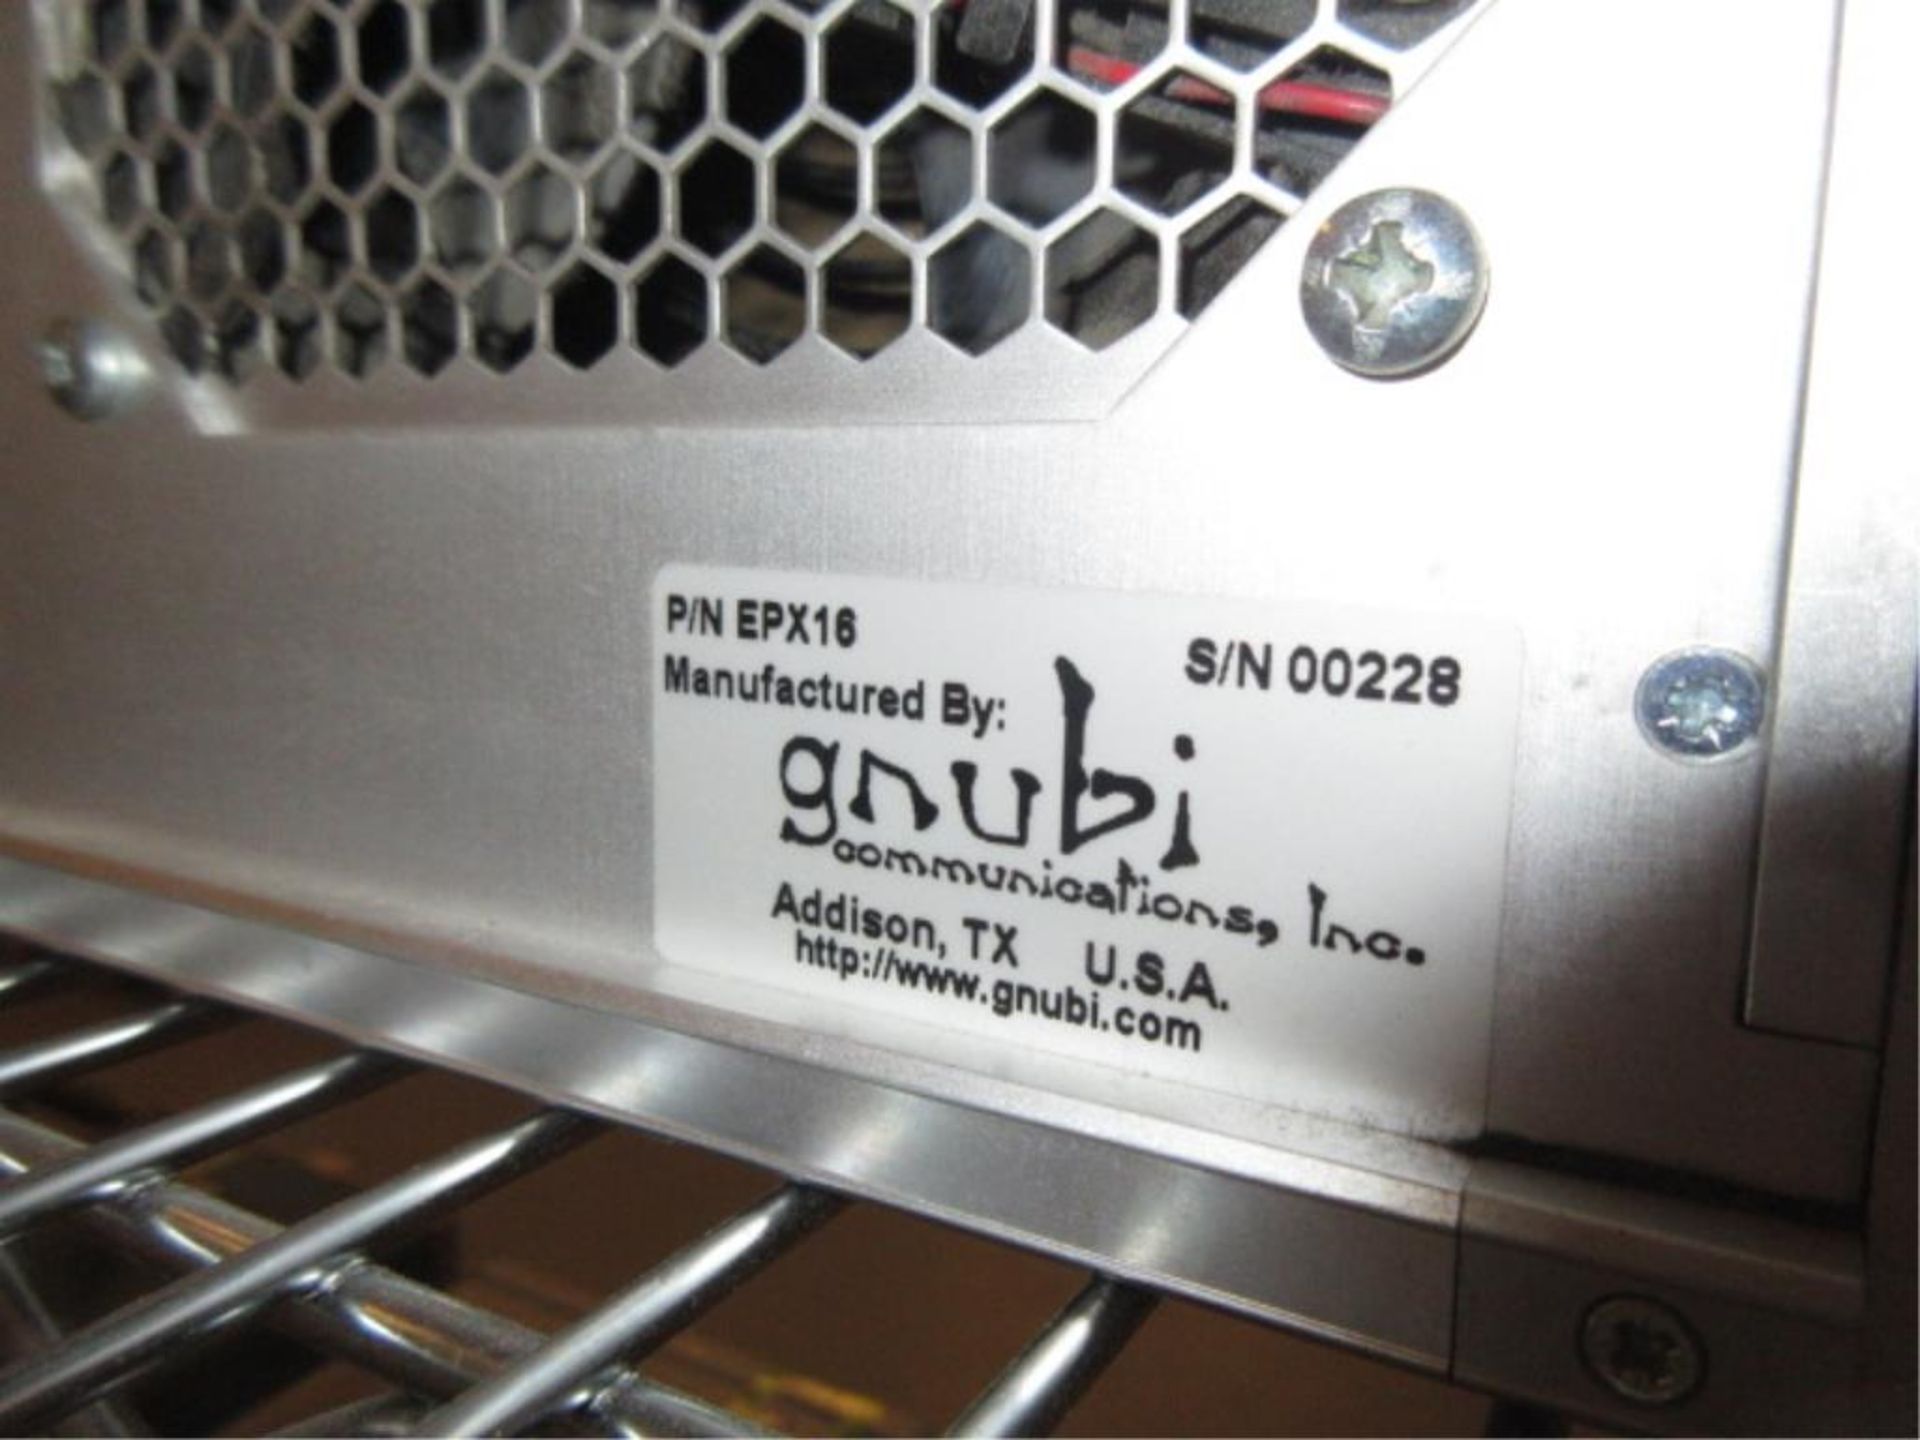 Gnubi Communications EPX16 Telecom Test Chassis. Remote Telecom Test Chassis, 18-expansion slots, - Image 4 of 4